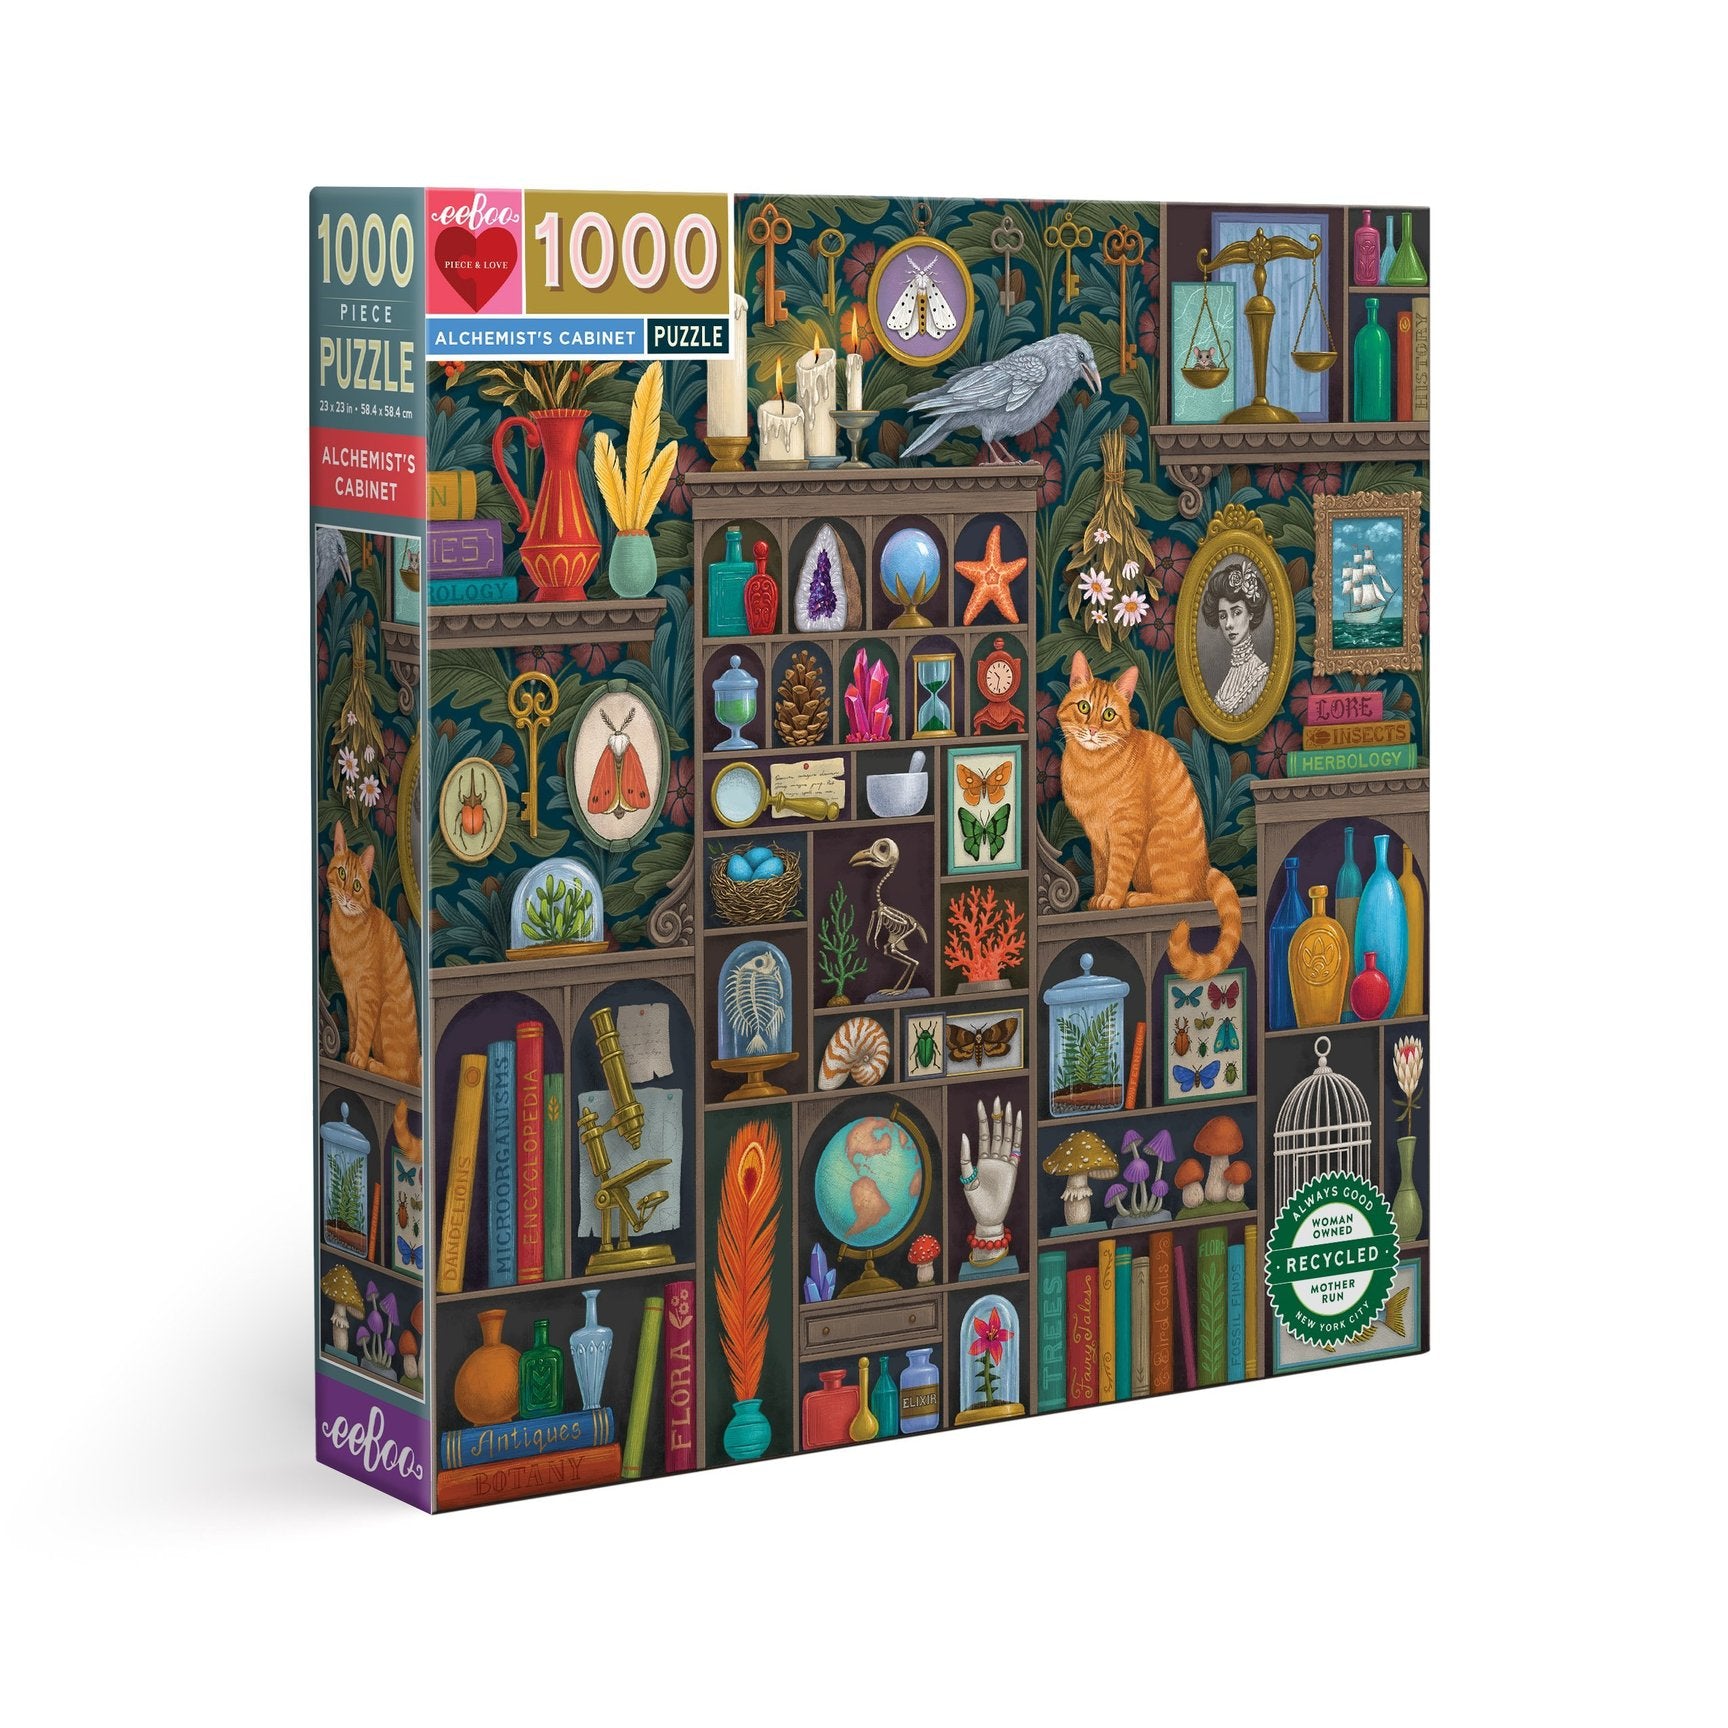 Alchemist's Cabinet 1000 Piece Puzzle - Heart of the Home PA